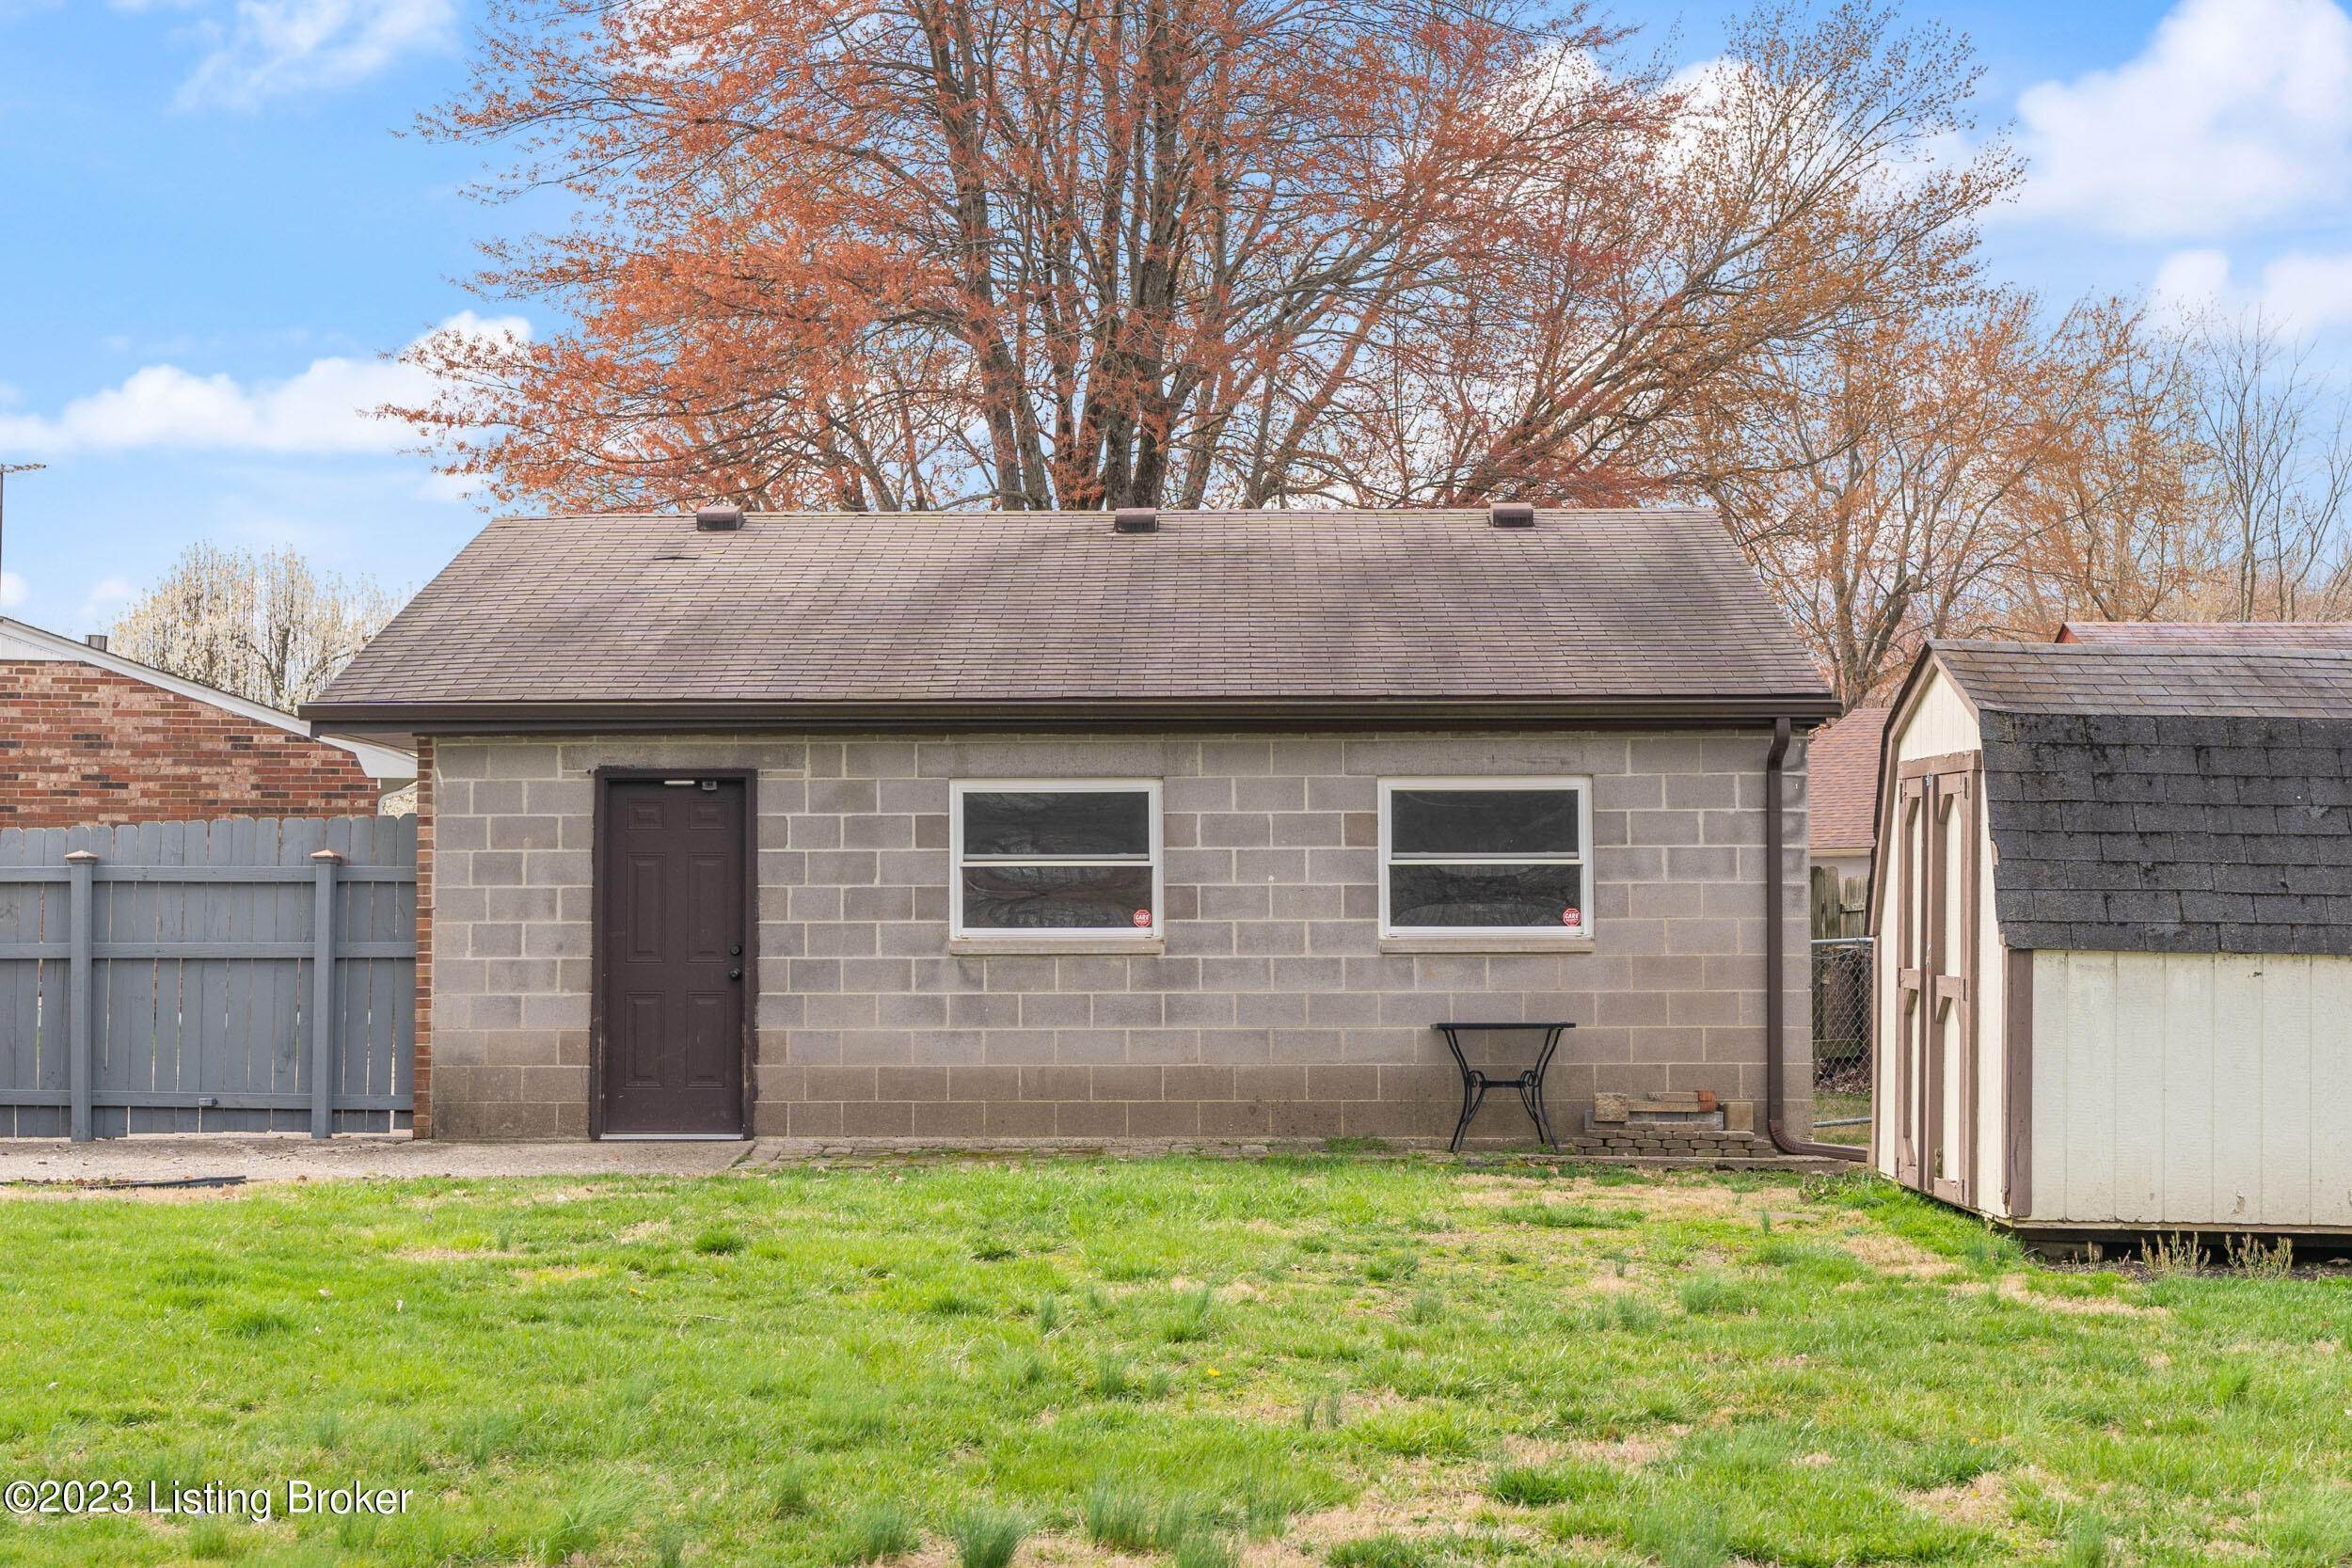 26. Single Family at Louisville, KY 40229